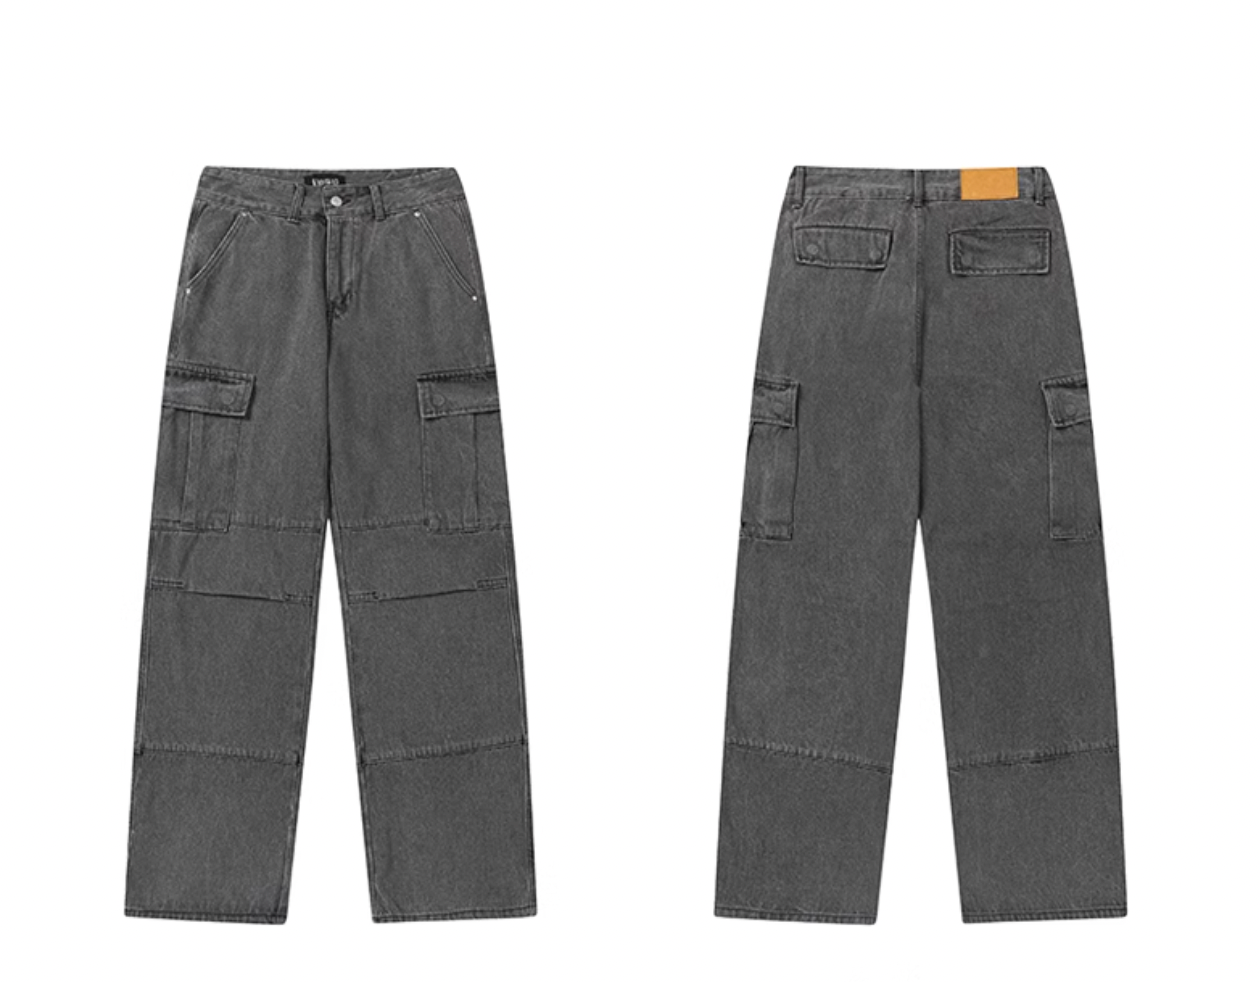 F3F Select Washed Patchwork Multi Pocket Work Cargo Pants